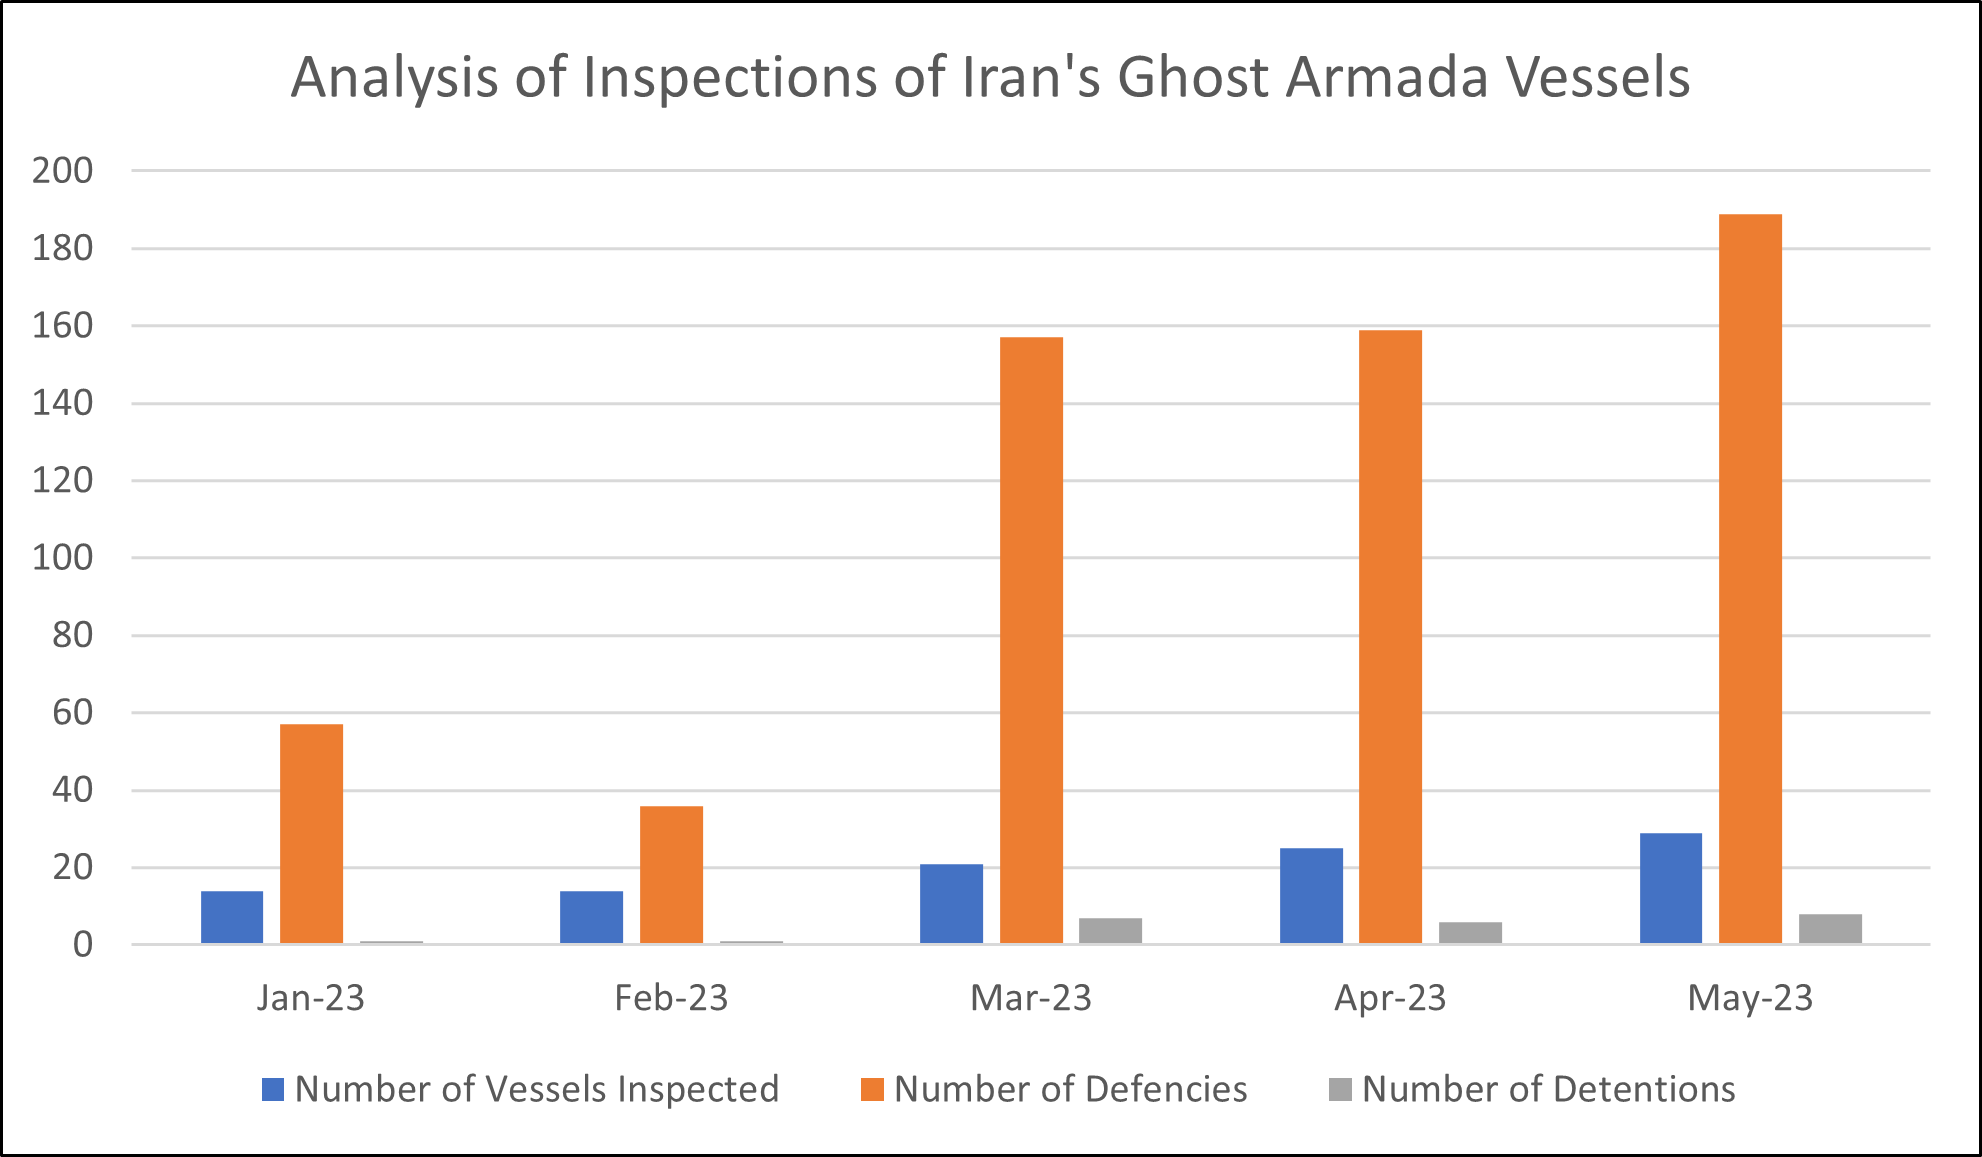 Analysis of Inspections of Iran's Ghost Armada Vessels